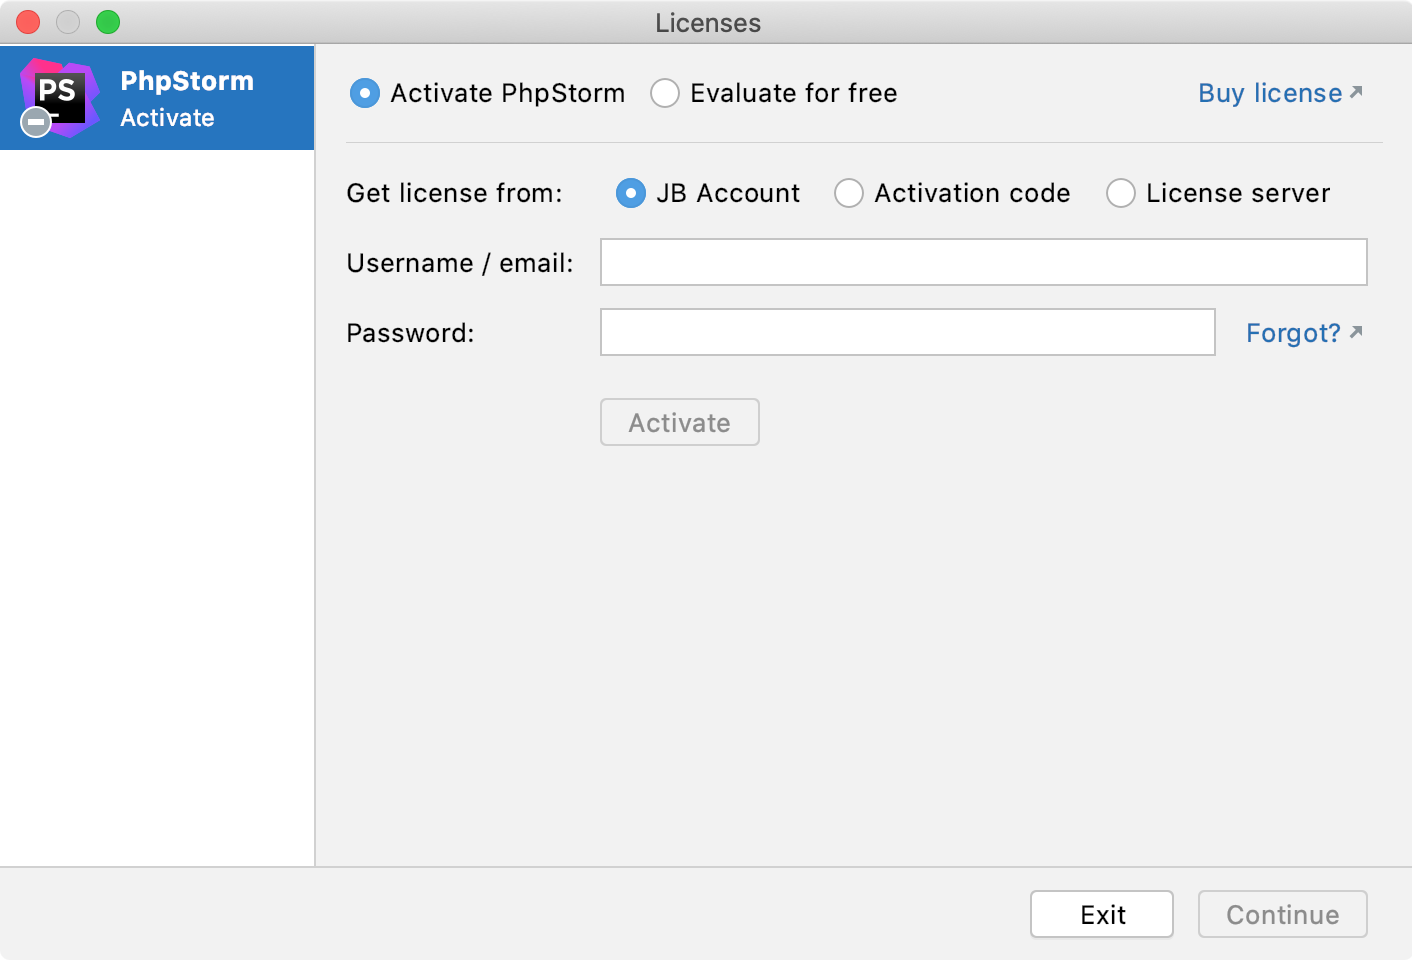 The License Activation dialog